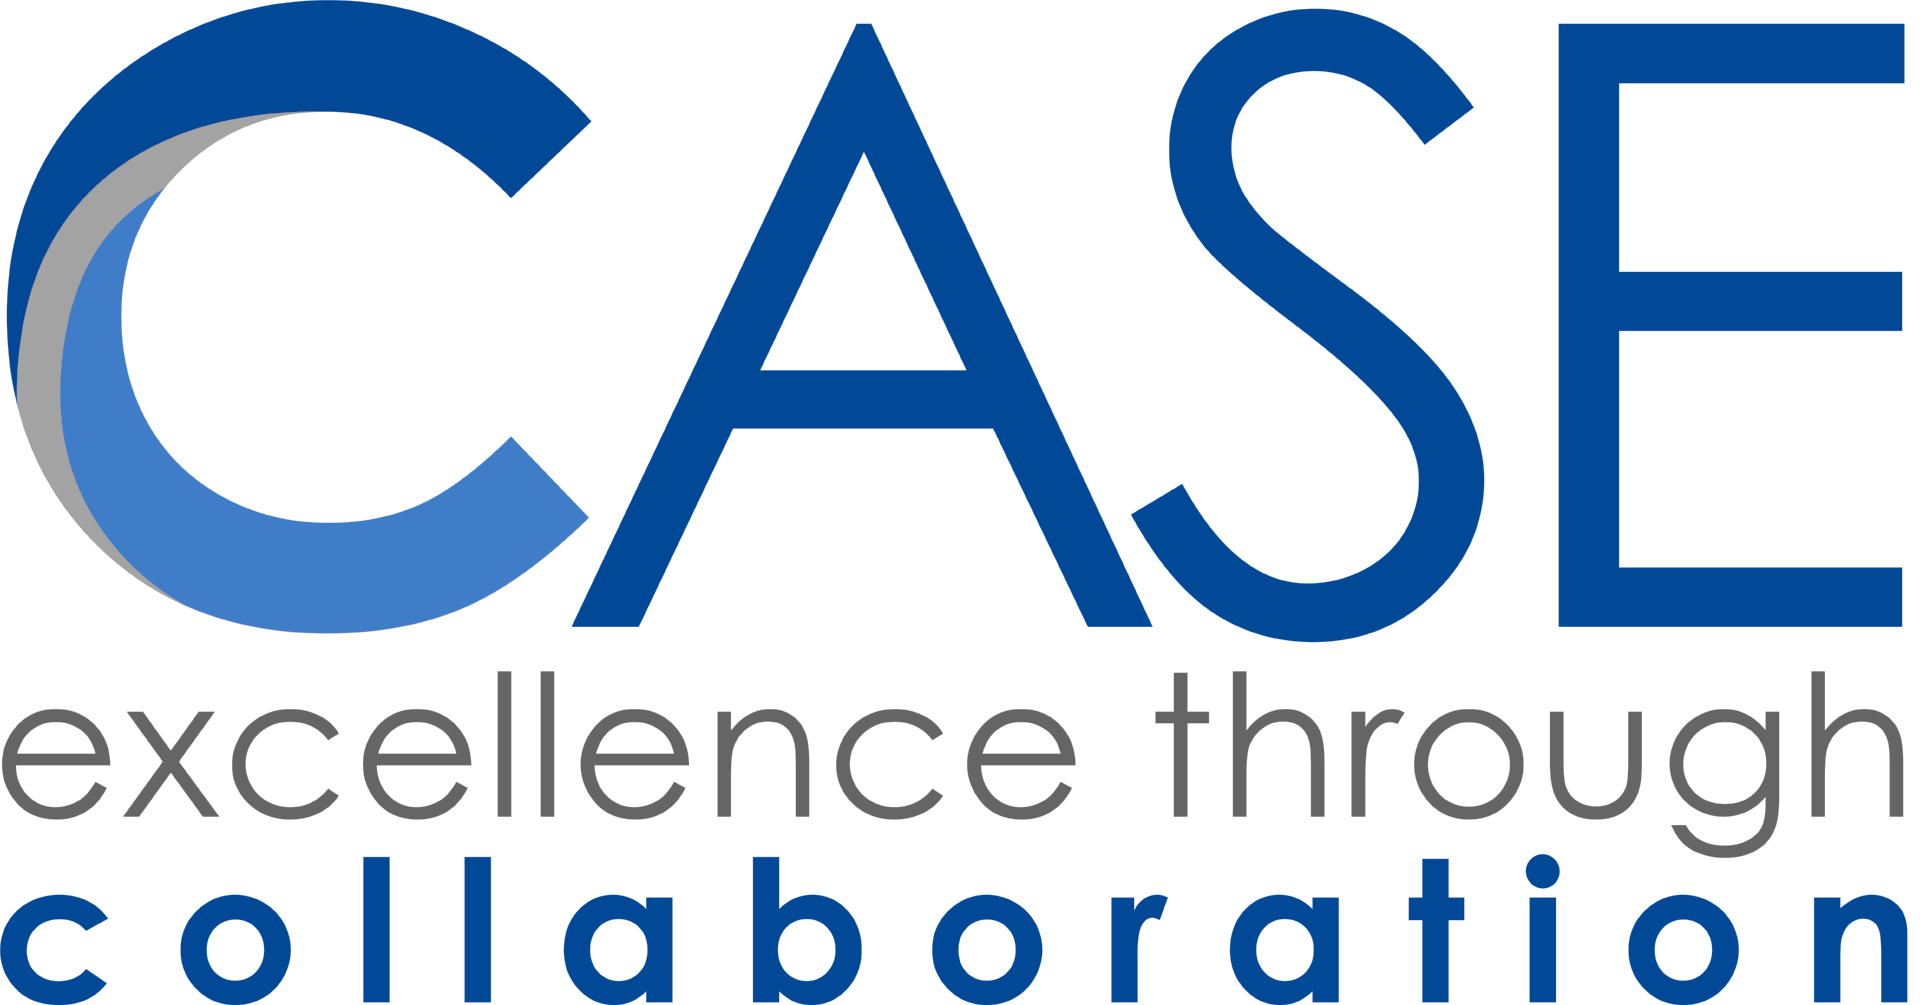 CASE (Cooperative Association for Special Education)'s Logo